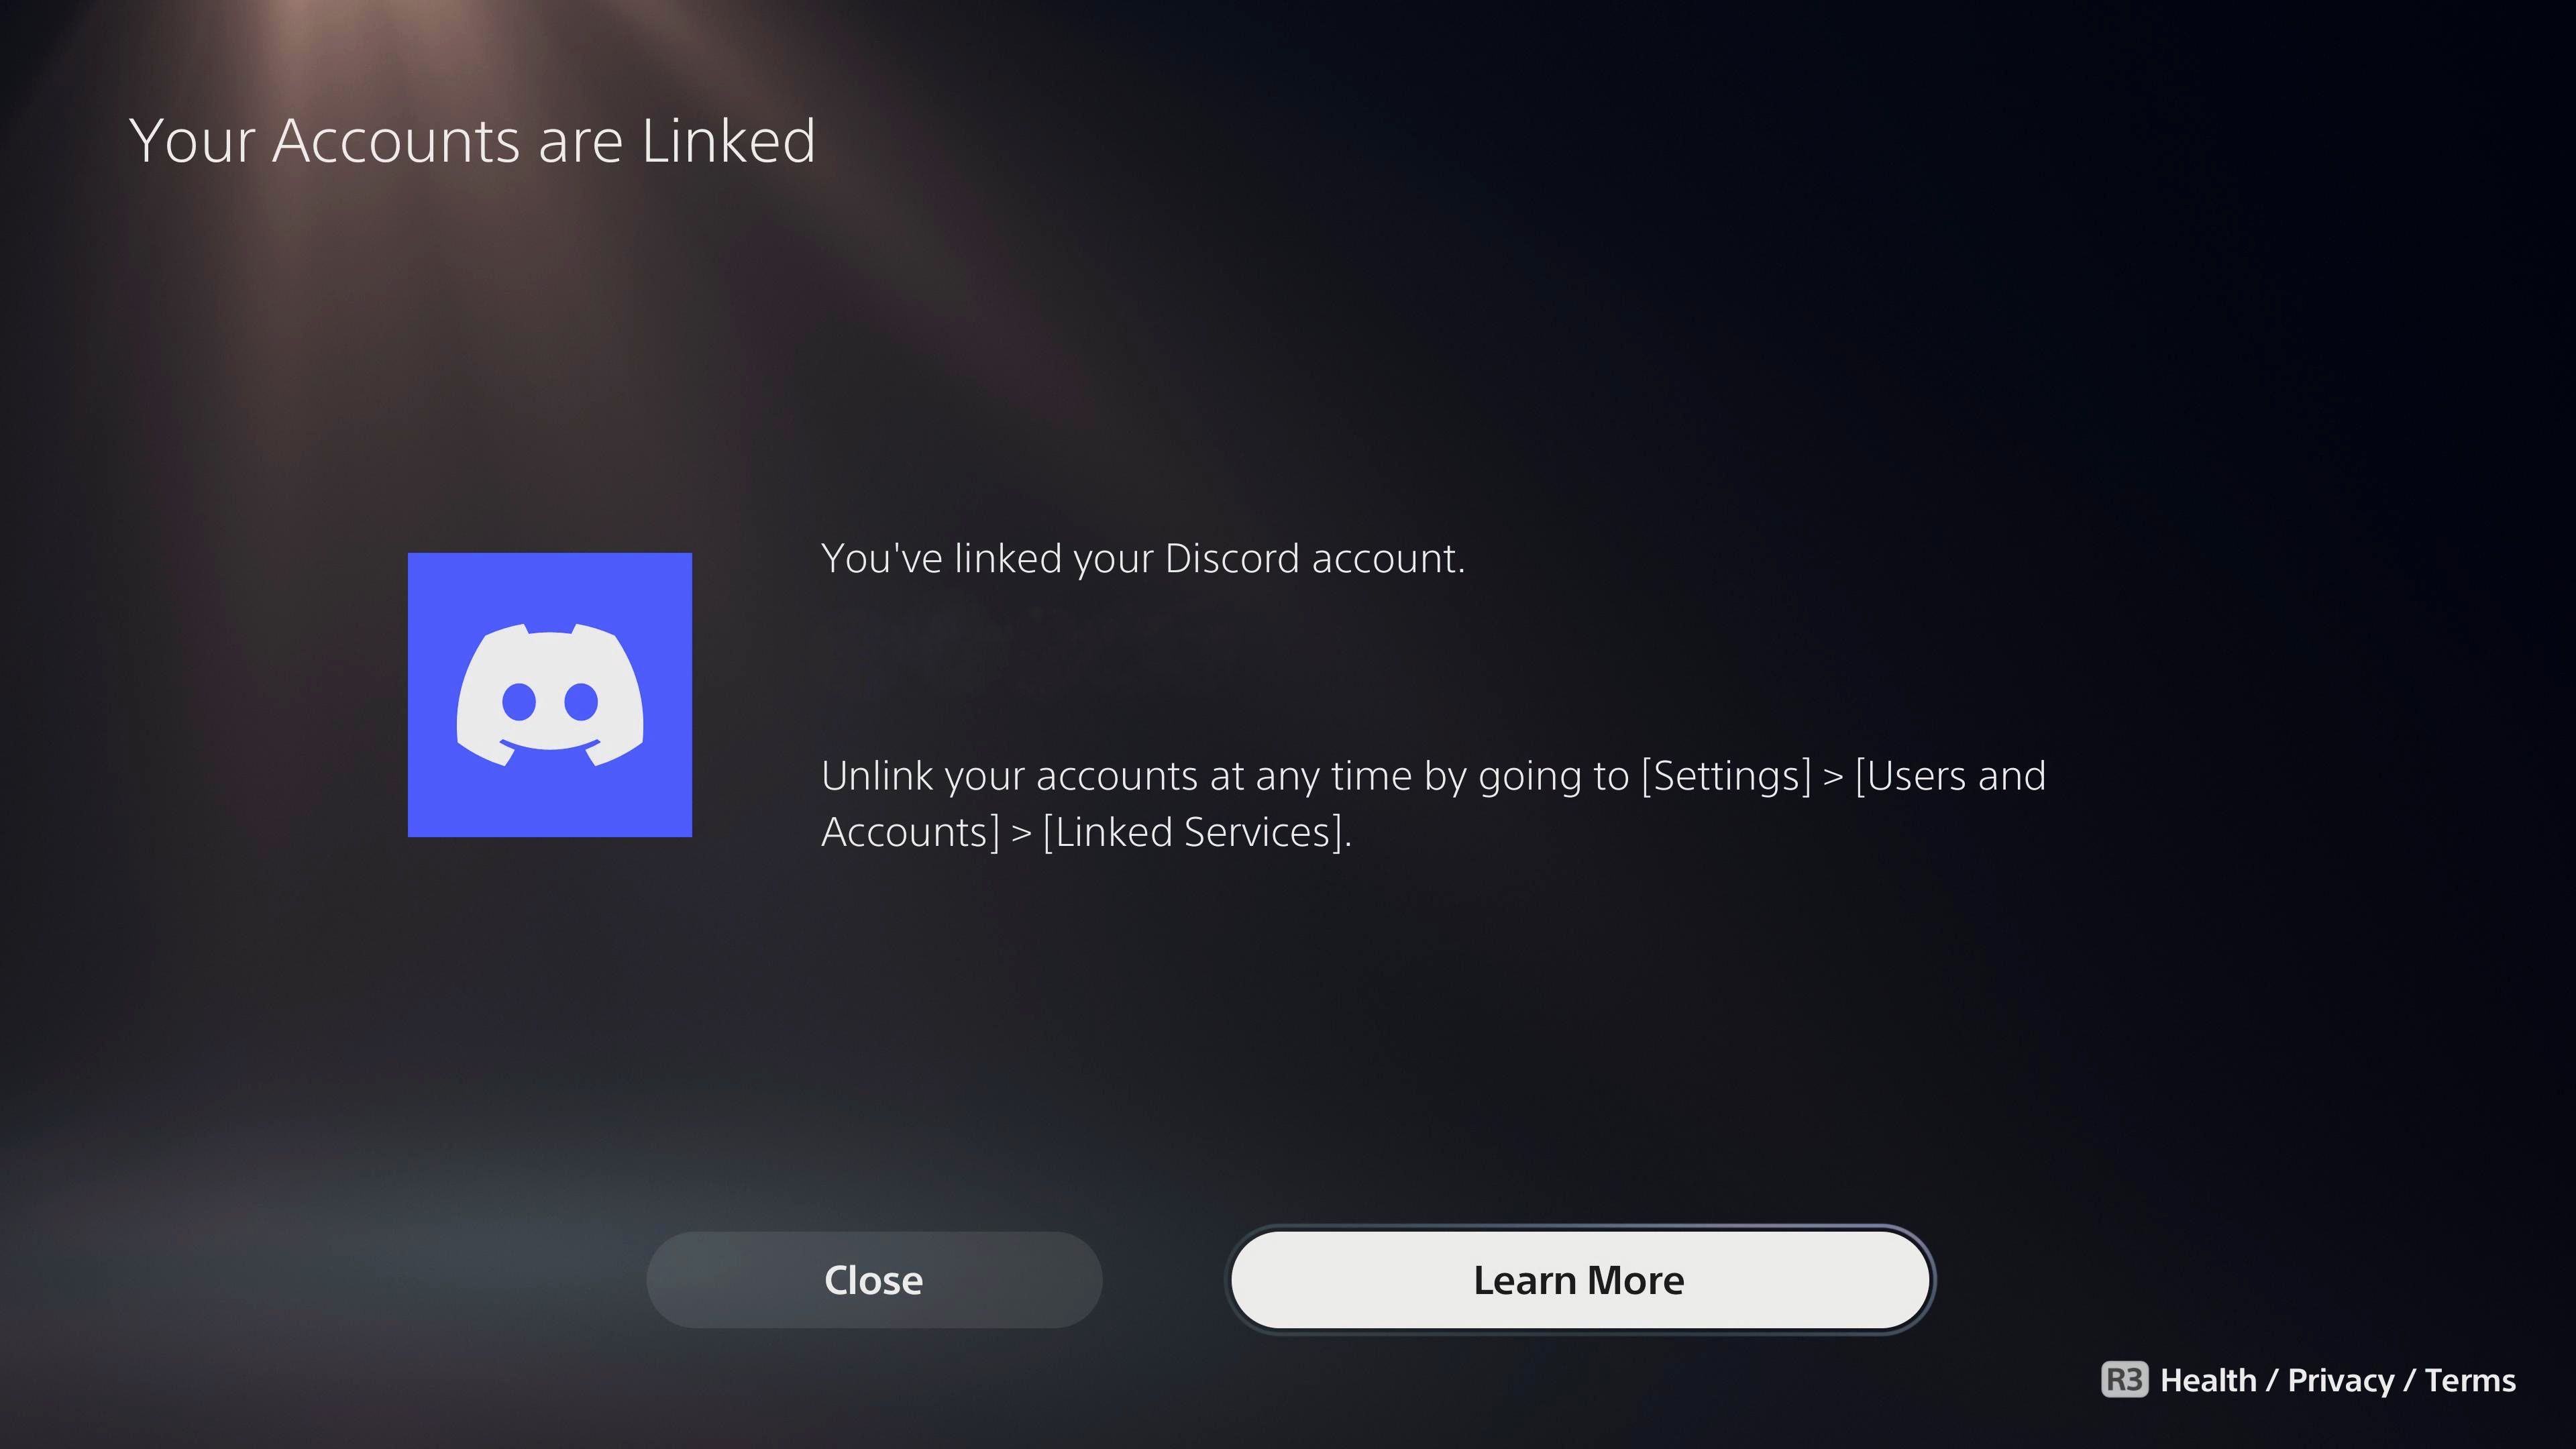 PlayStation 5 Discord integrates screen successfully linking Discord and PlayStation Network accounts